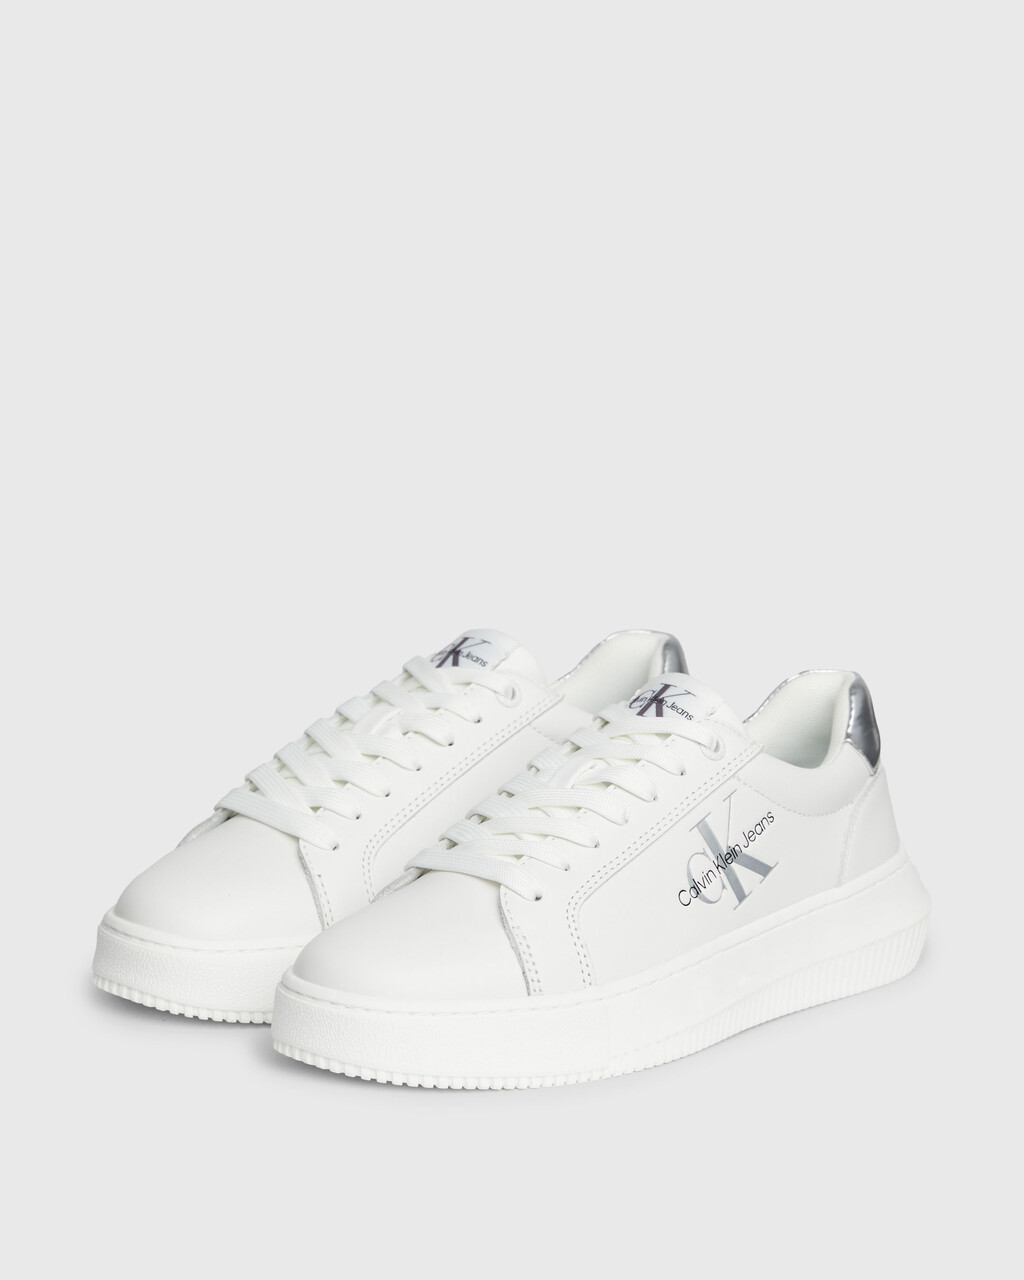 Leather Trainers, White/Silver, hi-res